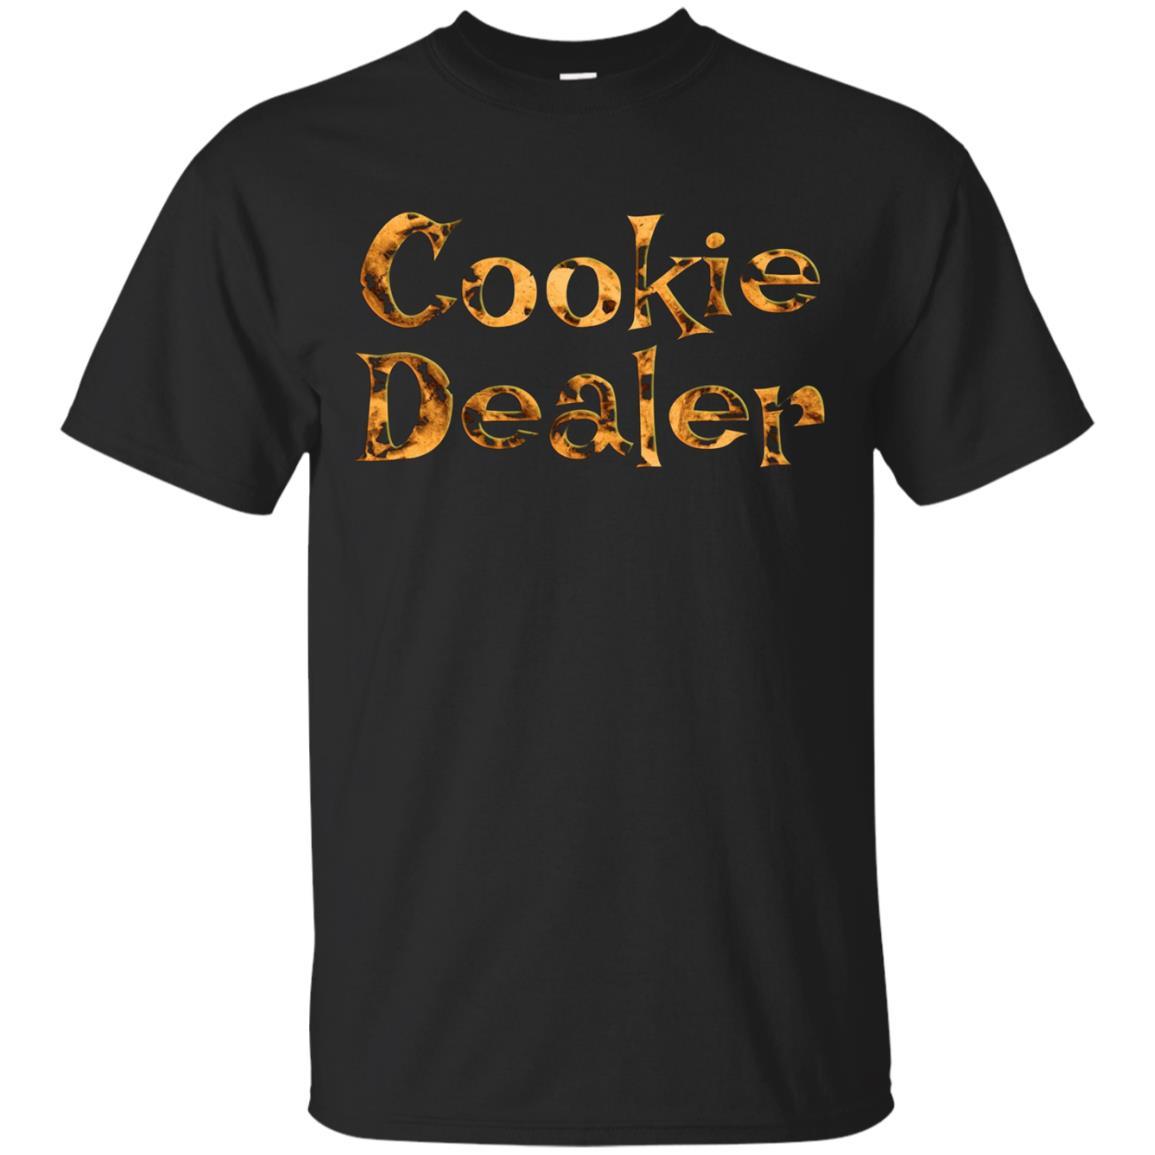 Cookie Dealer Shirt - For Scout Booth Troops!